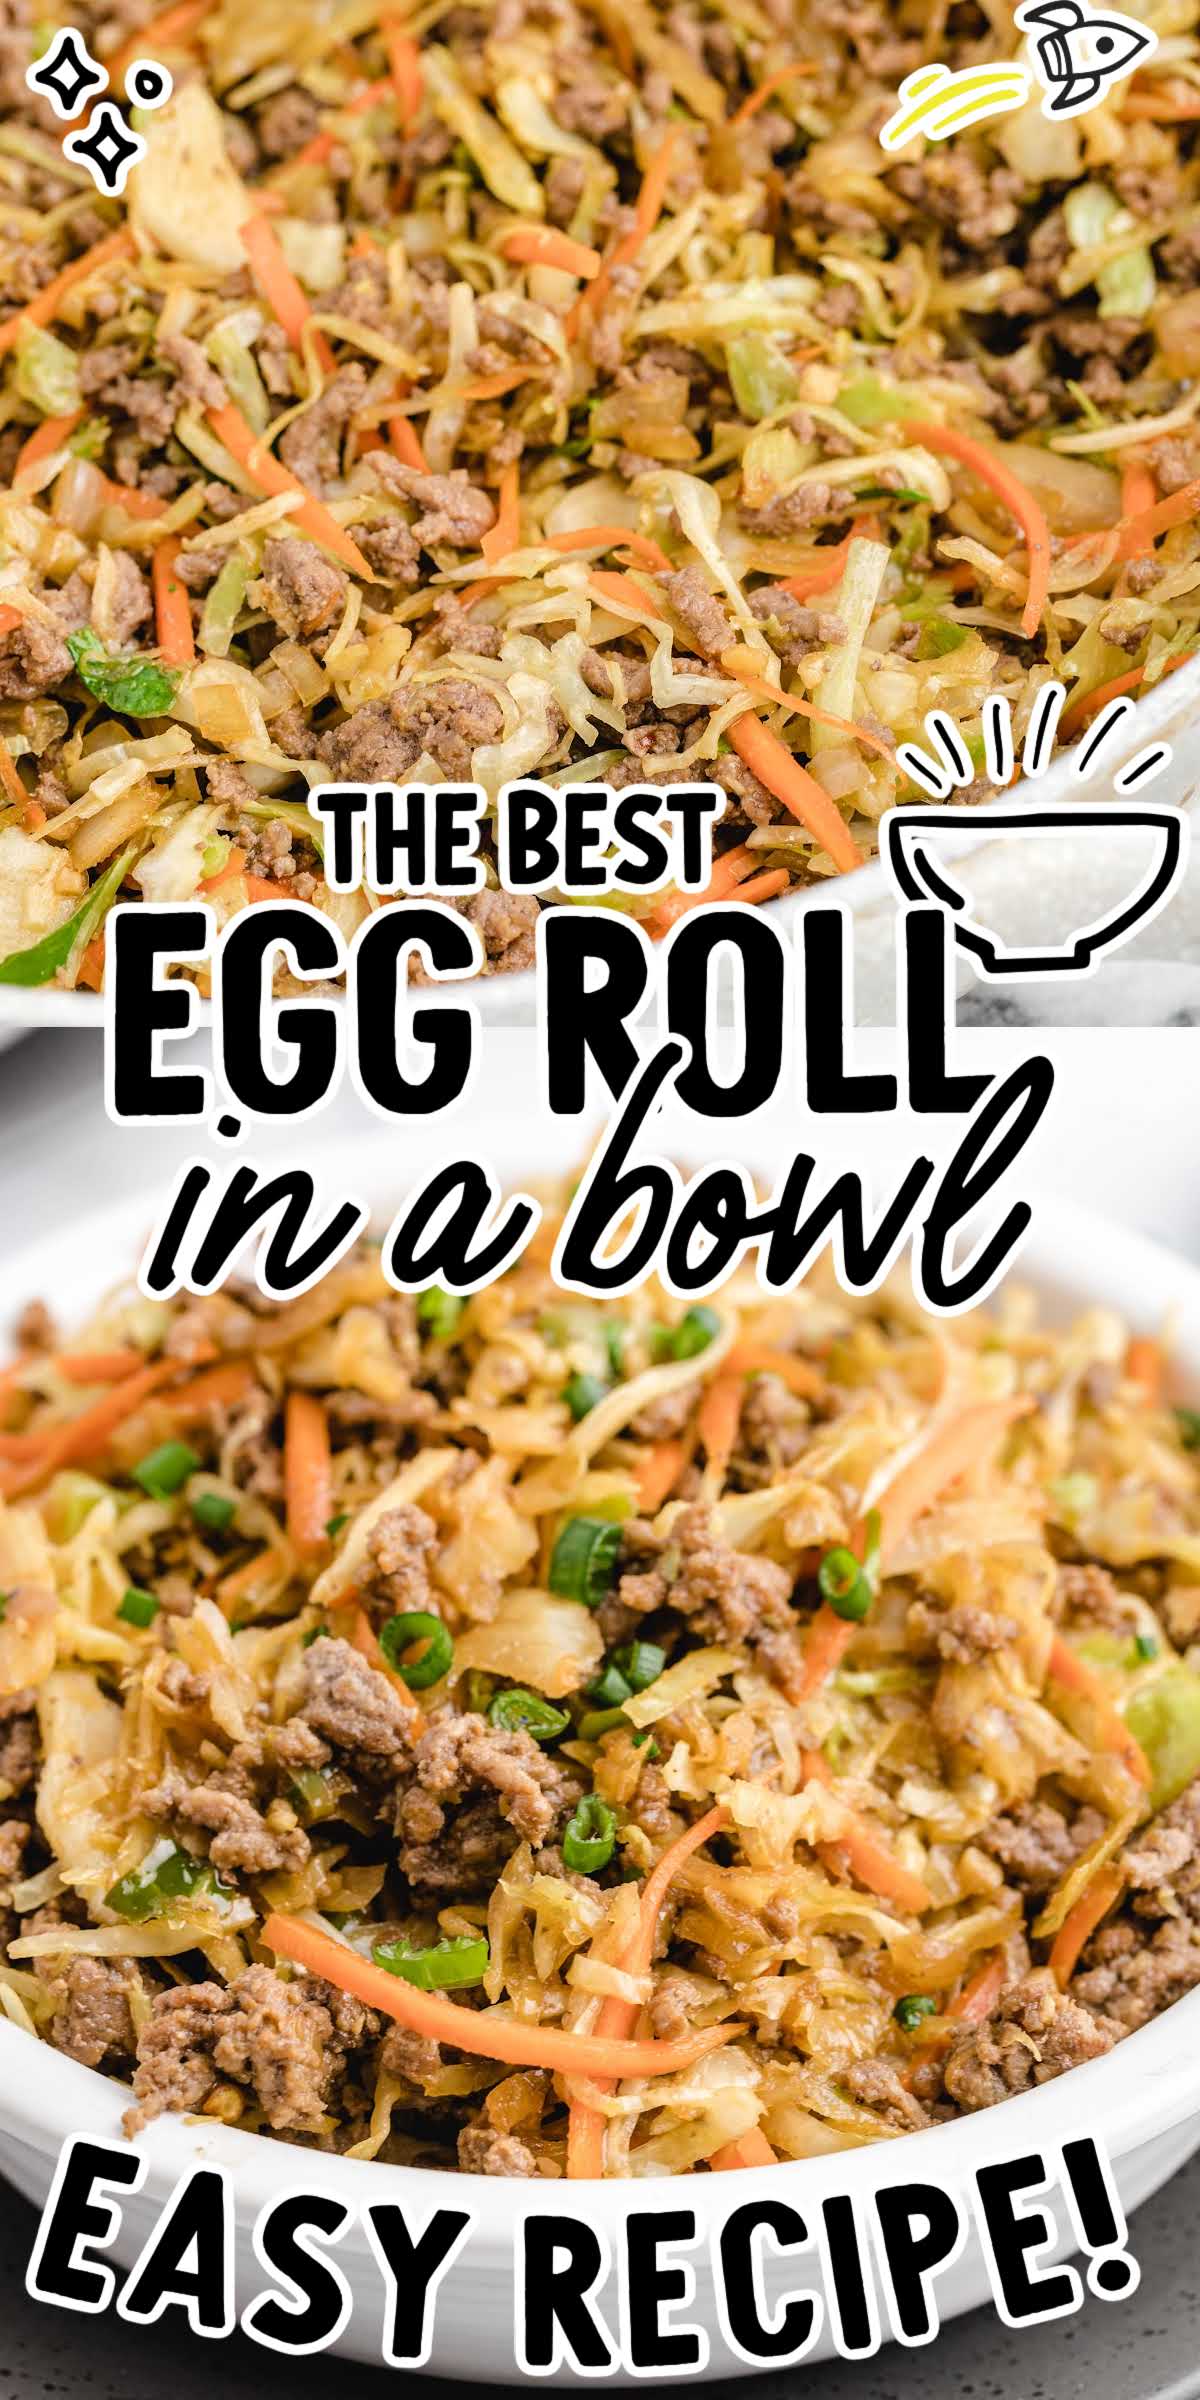 Egg Roll Bowls - Spaceships and Laser Beams